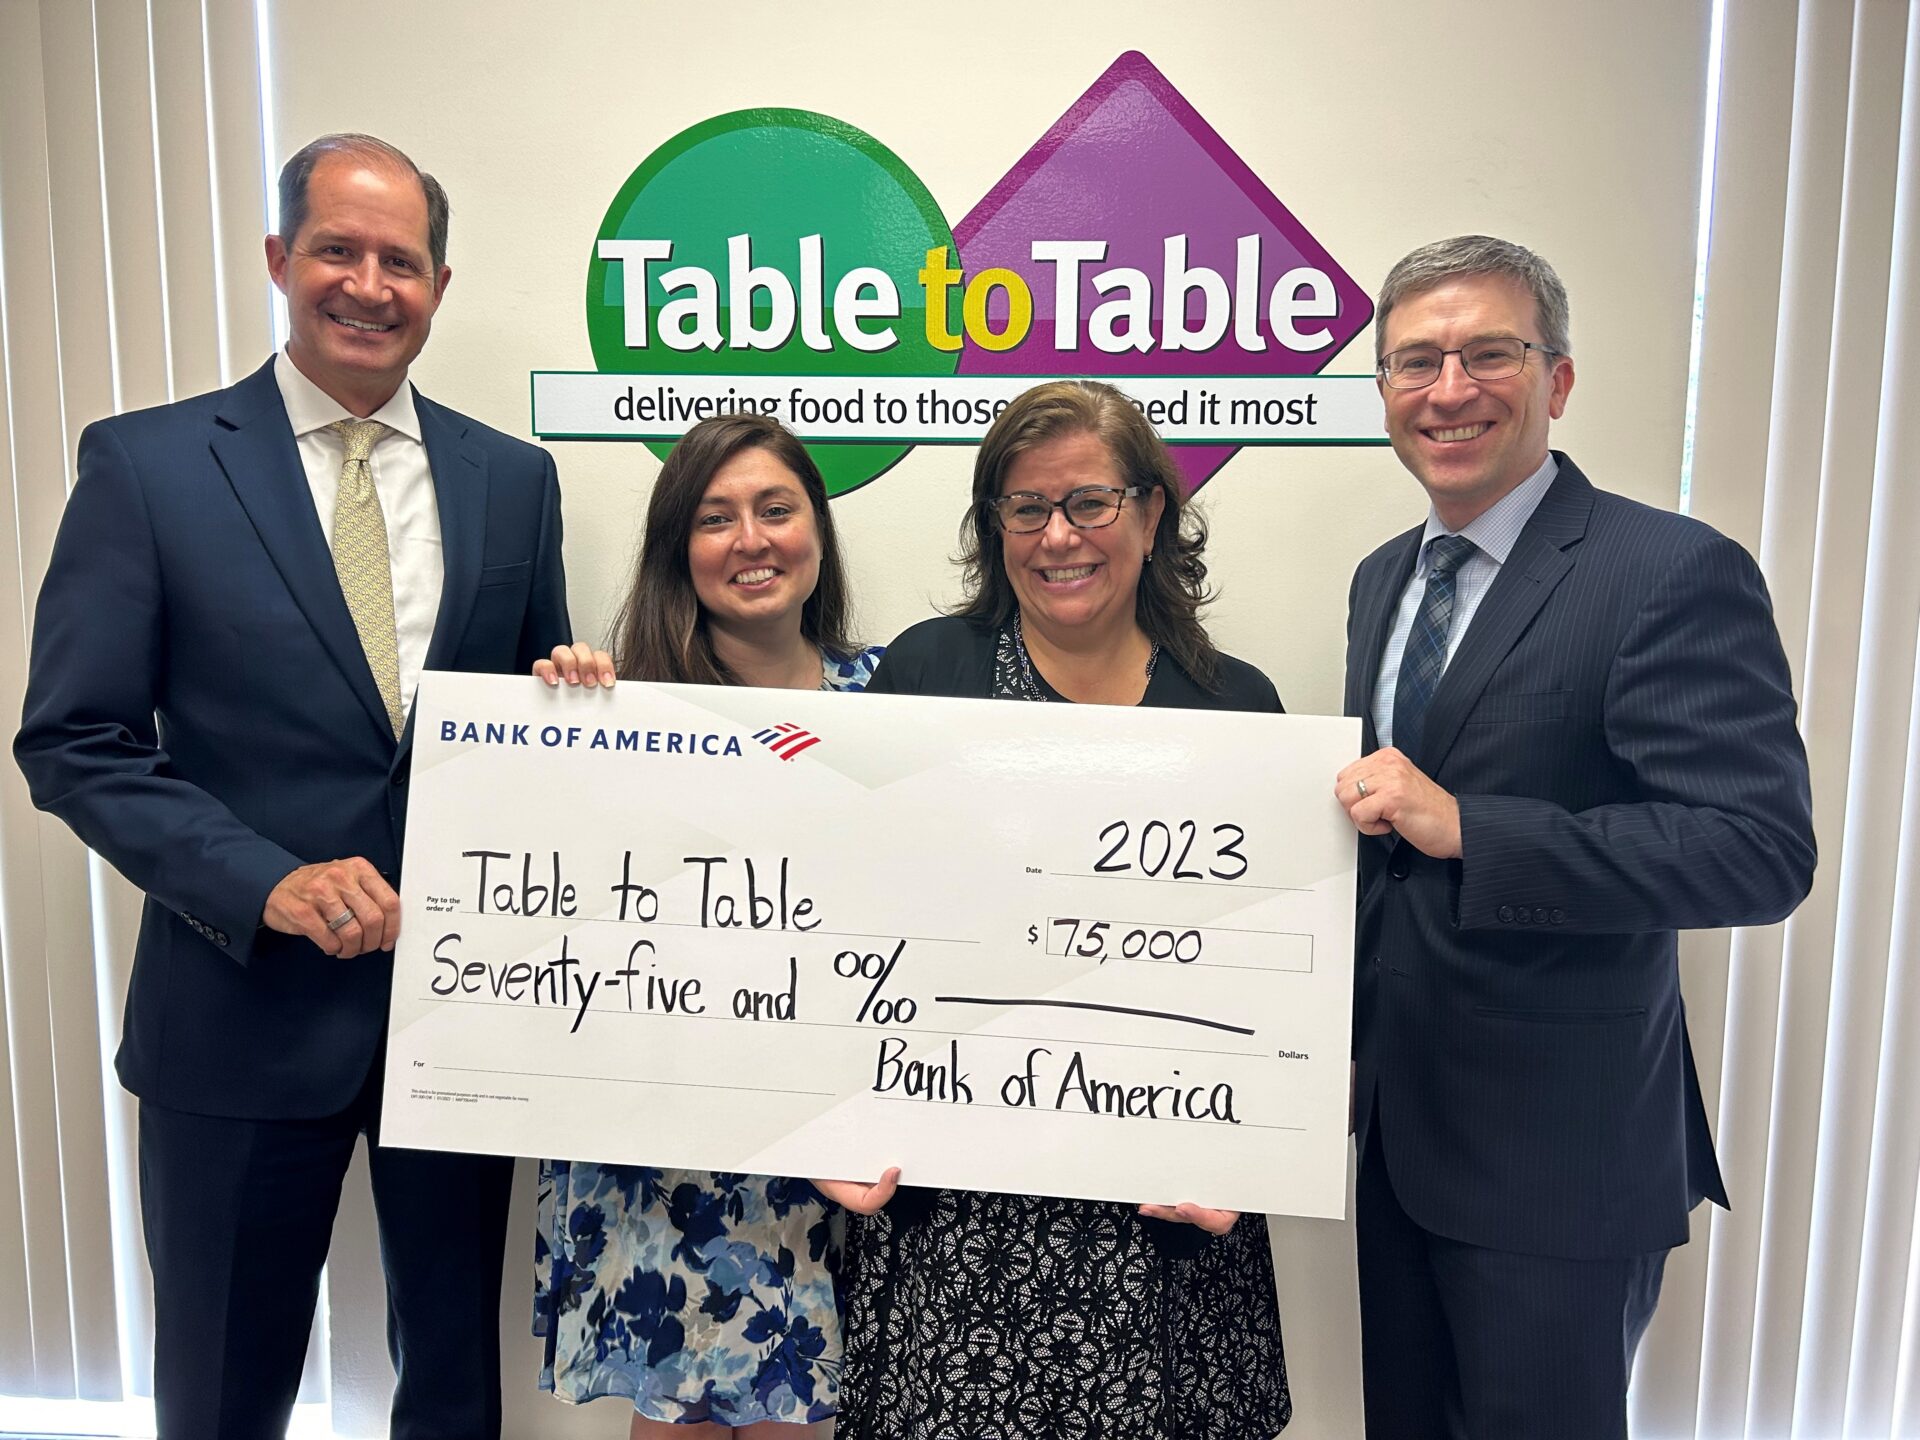 Table to Table Receives Grant from BofA to Support Alleviating Food Insecurity